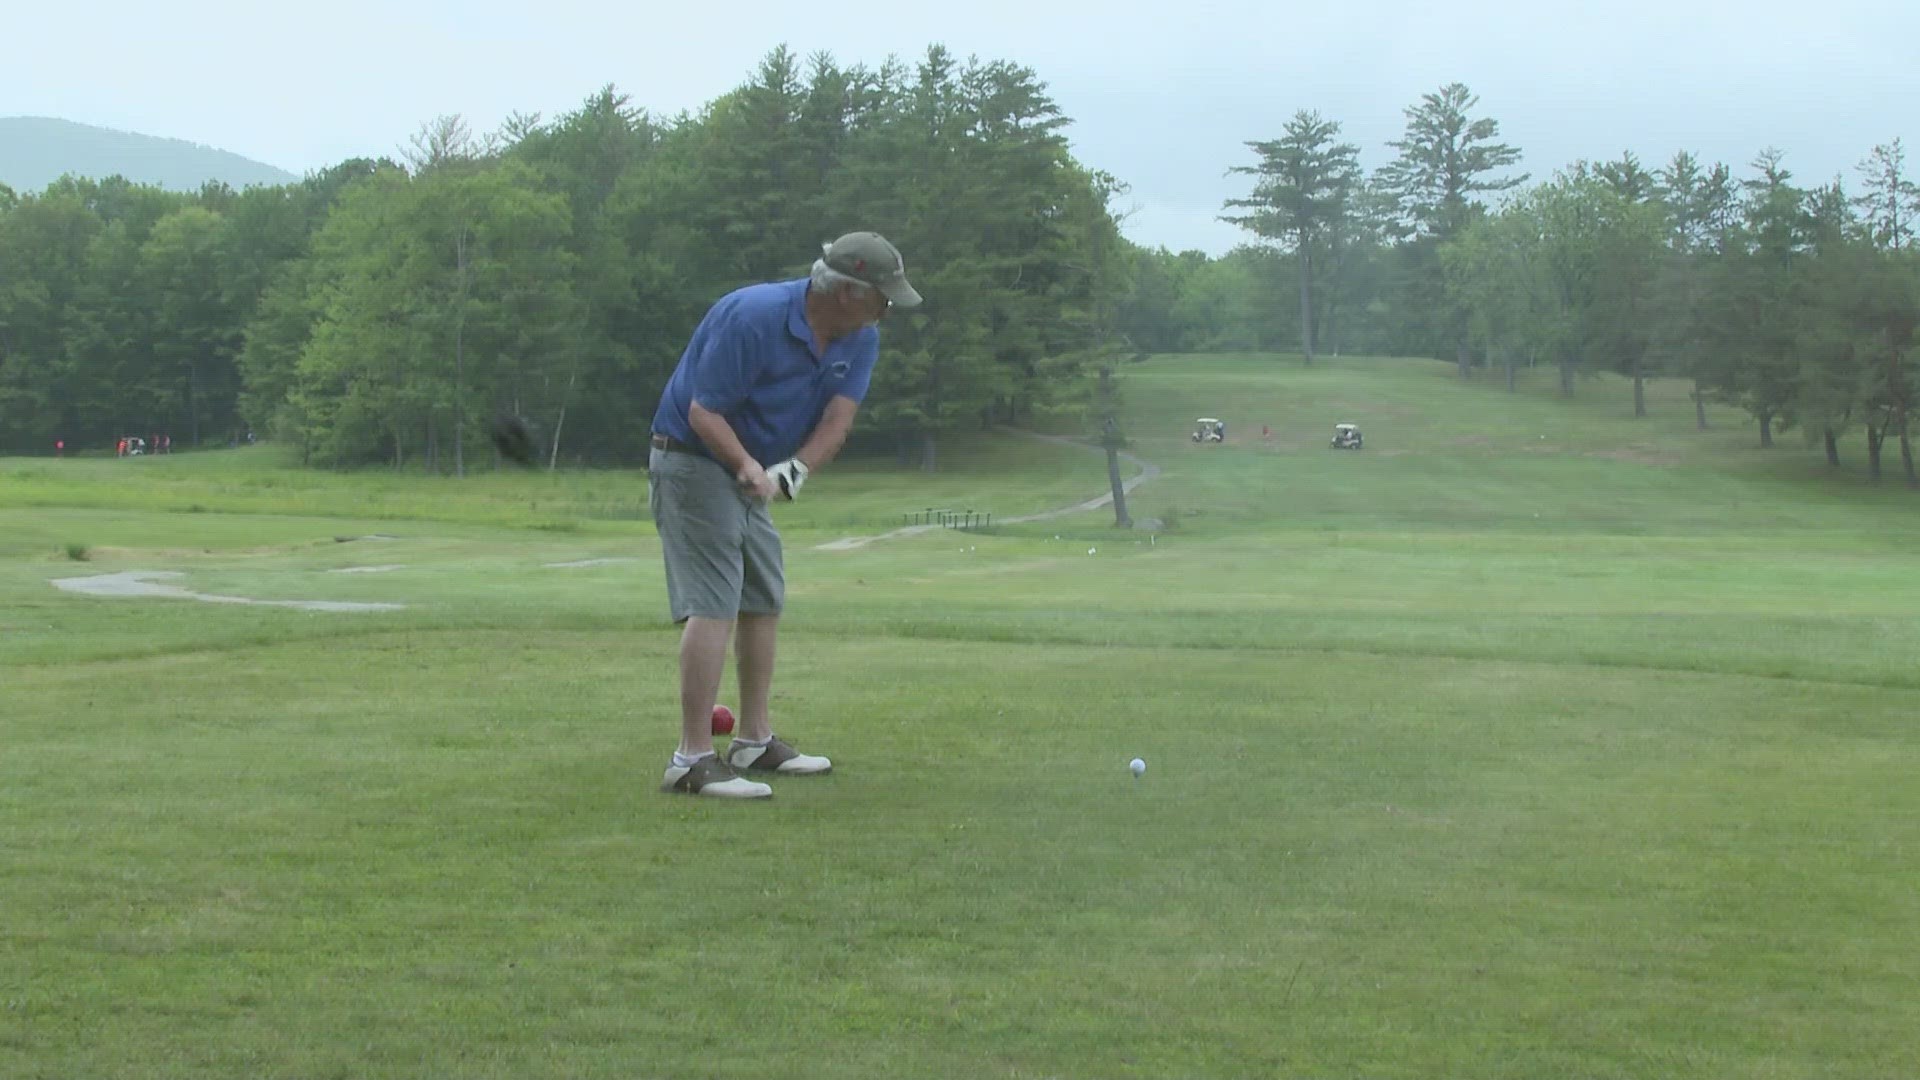 The 9-hole course in Mexico, Maine hosted its centennial celebration over the weekend. Members are now focused on serving the next generation of local golfers.